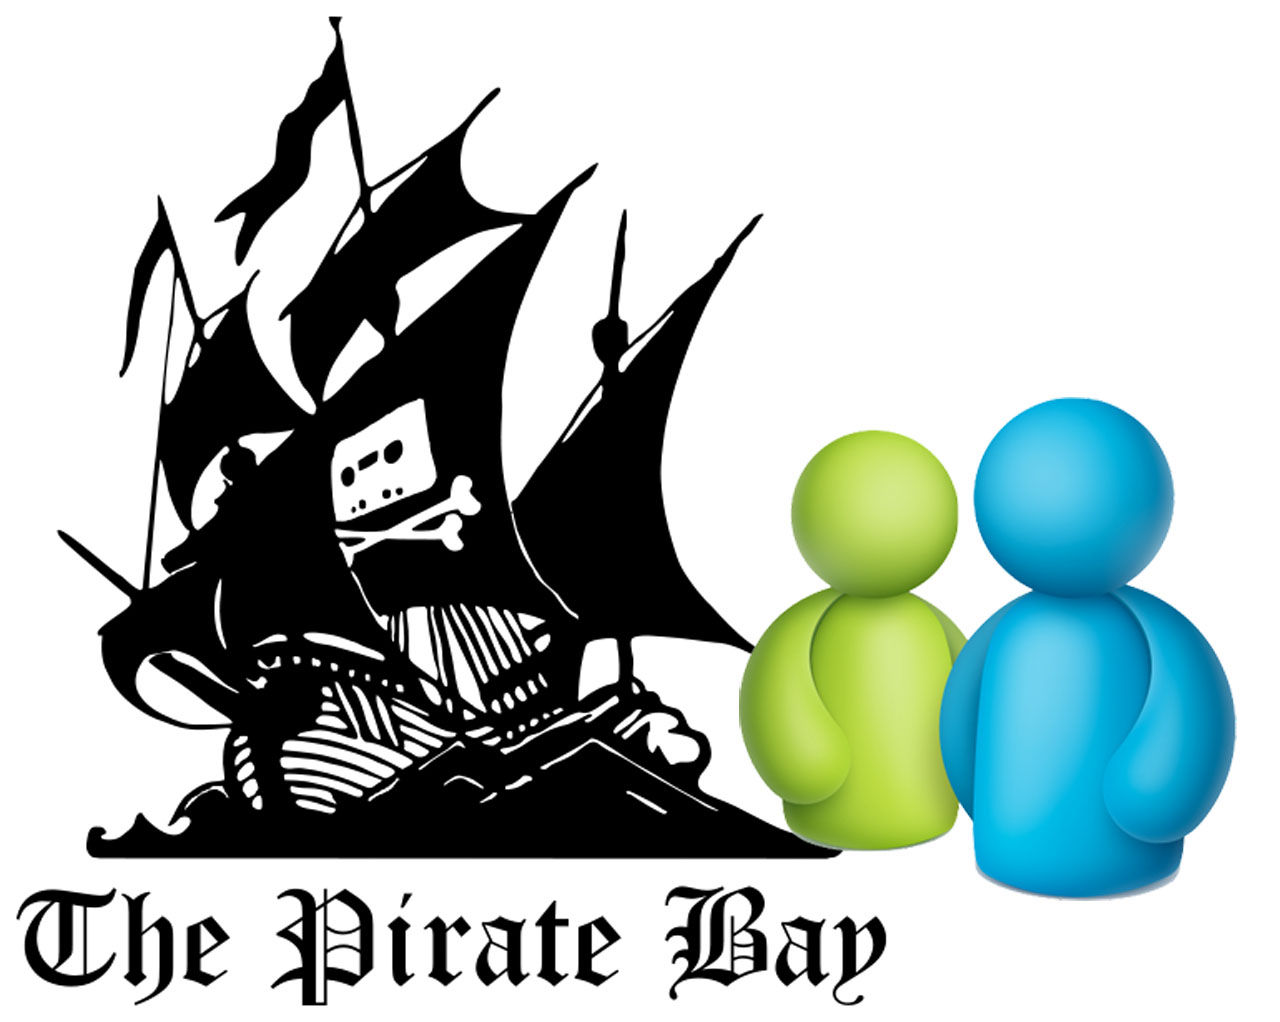 the pirate bay microsoft office